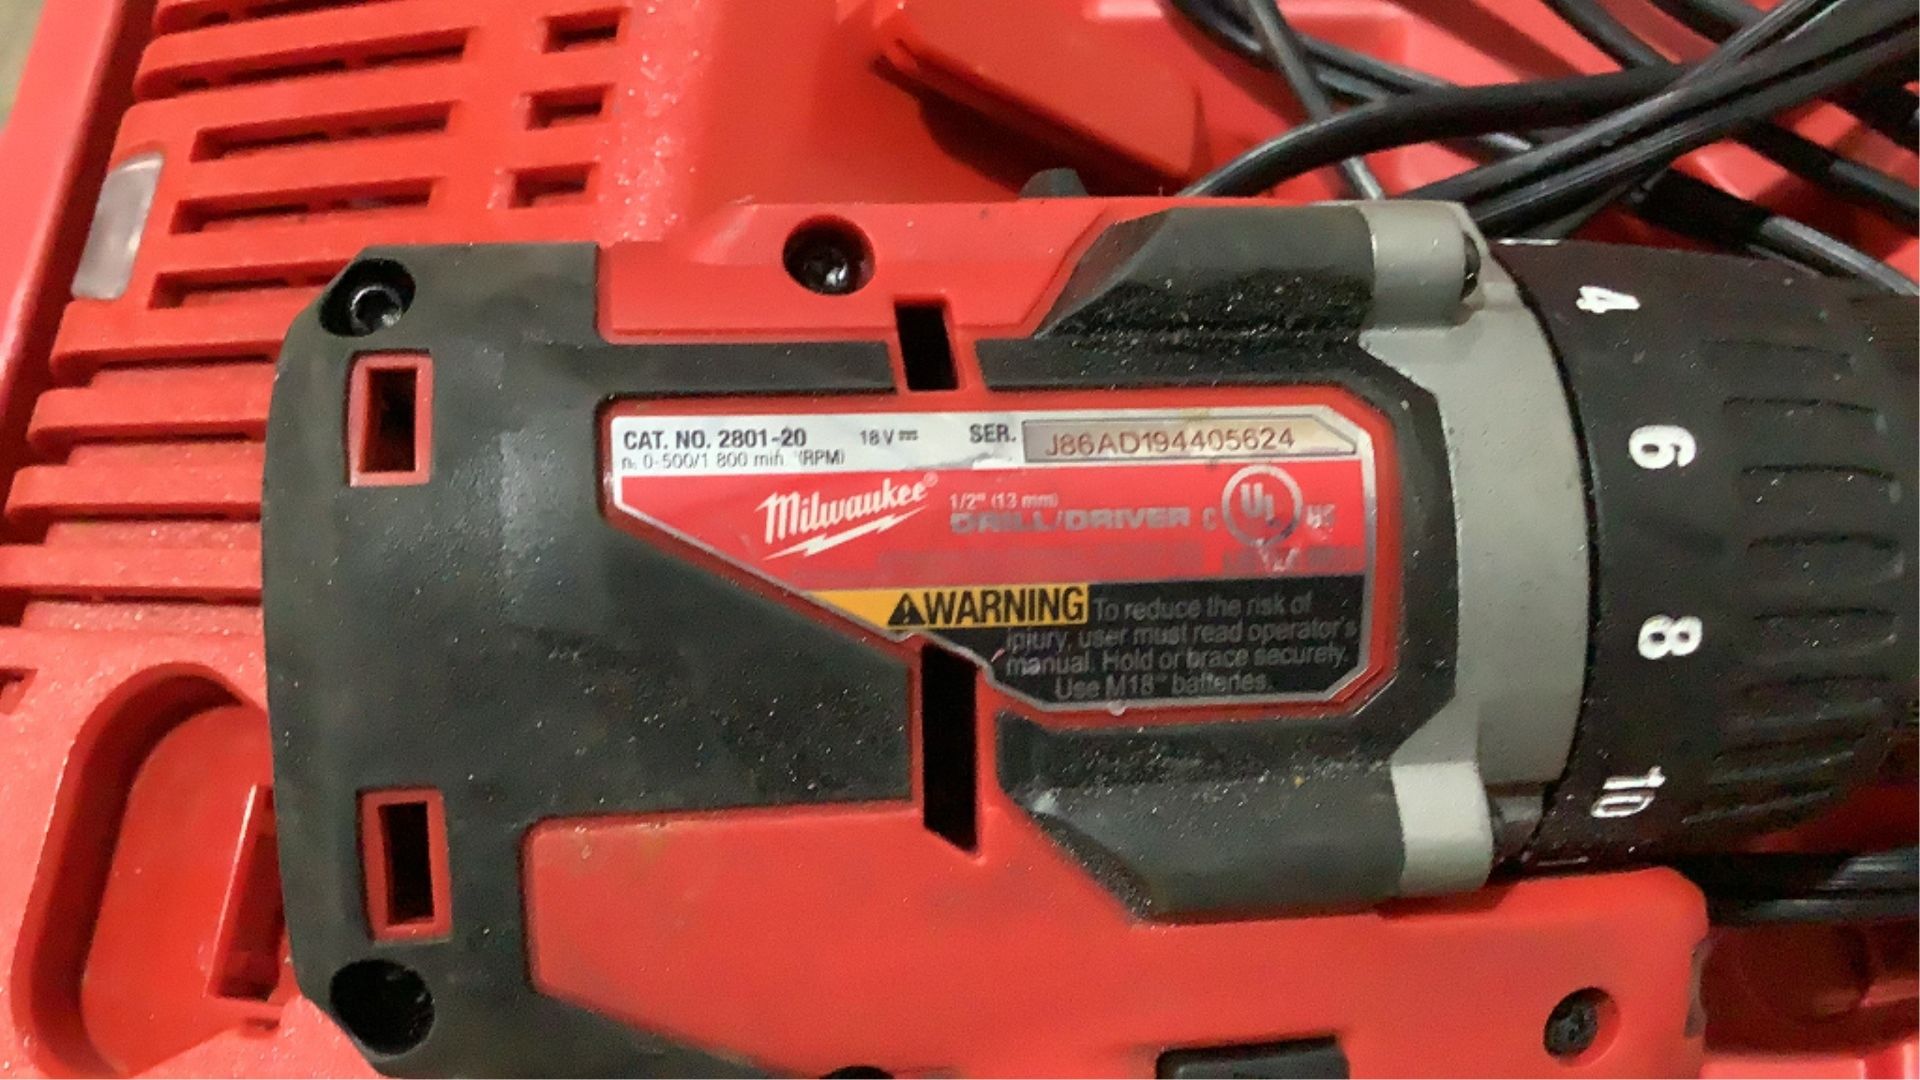 Milwaukee Cordless 1/2" Drill/Driver - Image 10 of 10